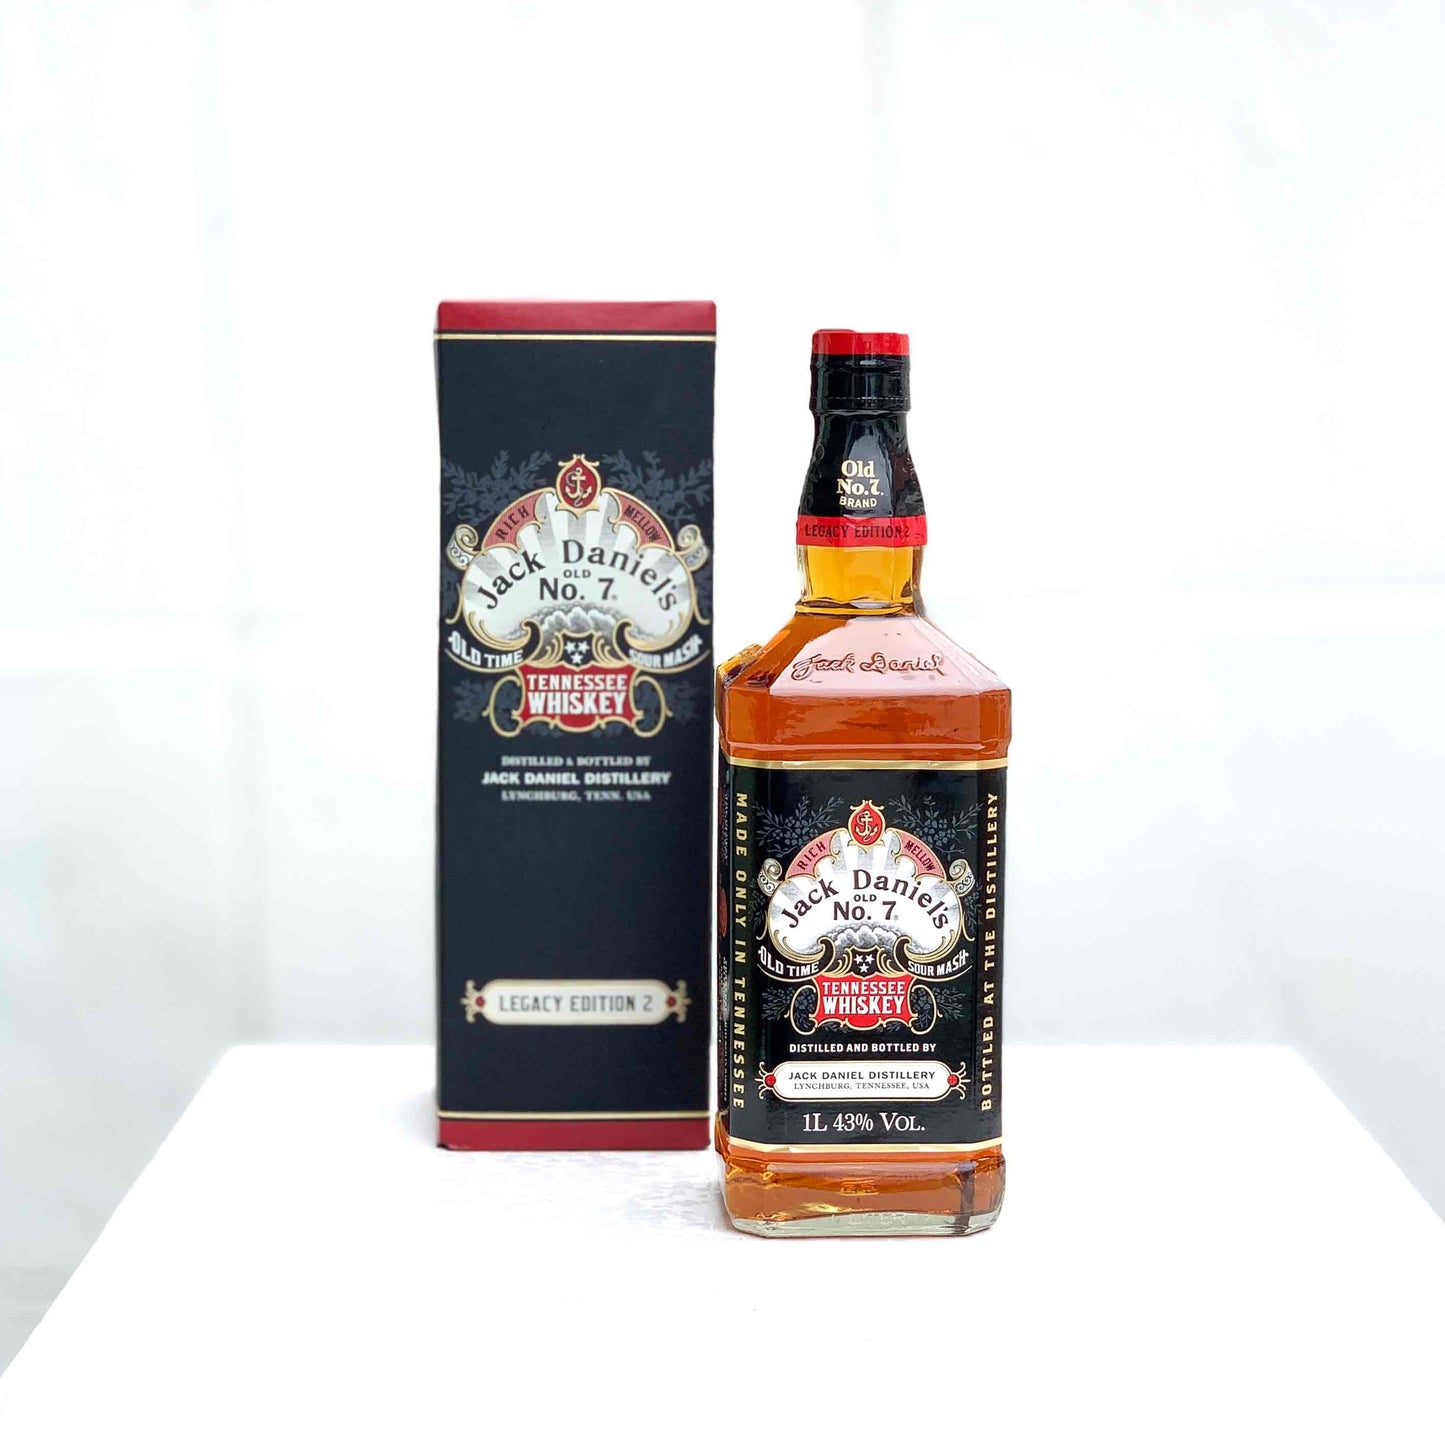 Jack Daniel’s Old No. 7 Legacy Edition 2 Tennessee Whiskey